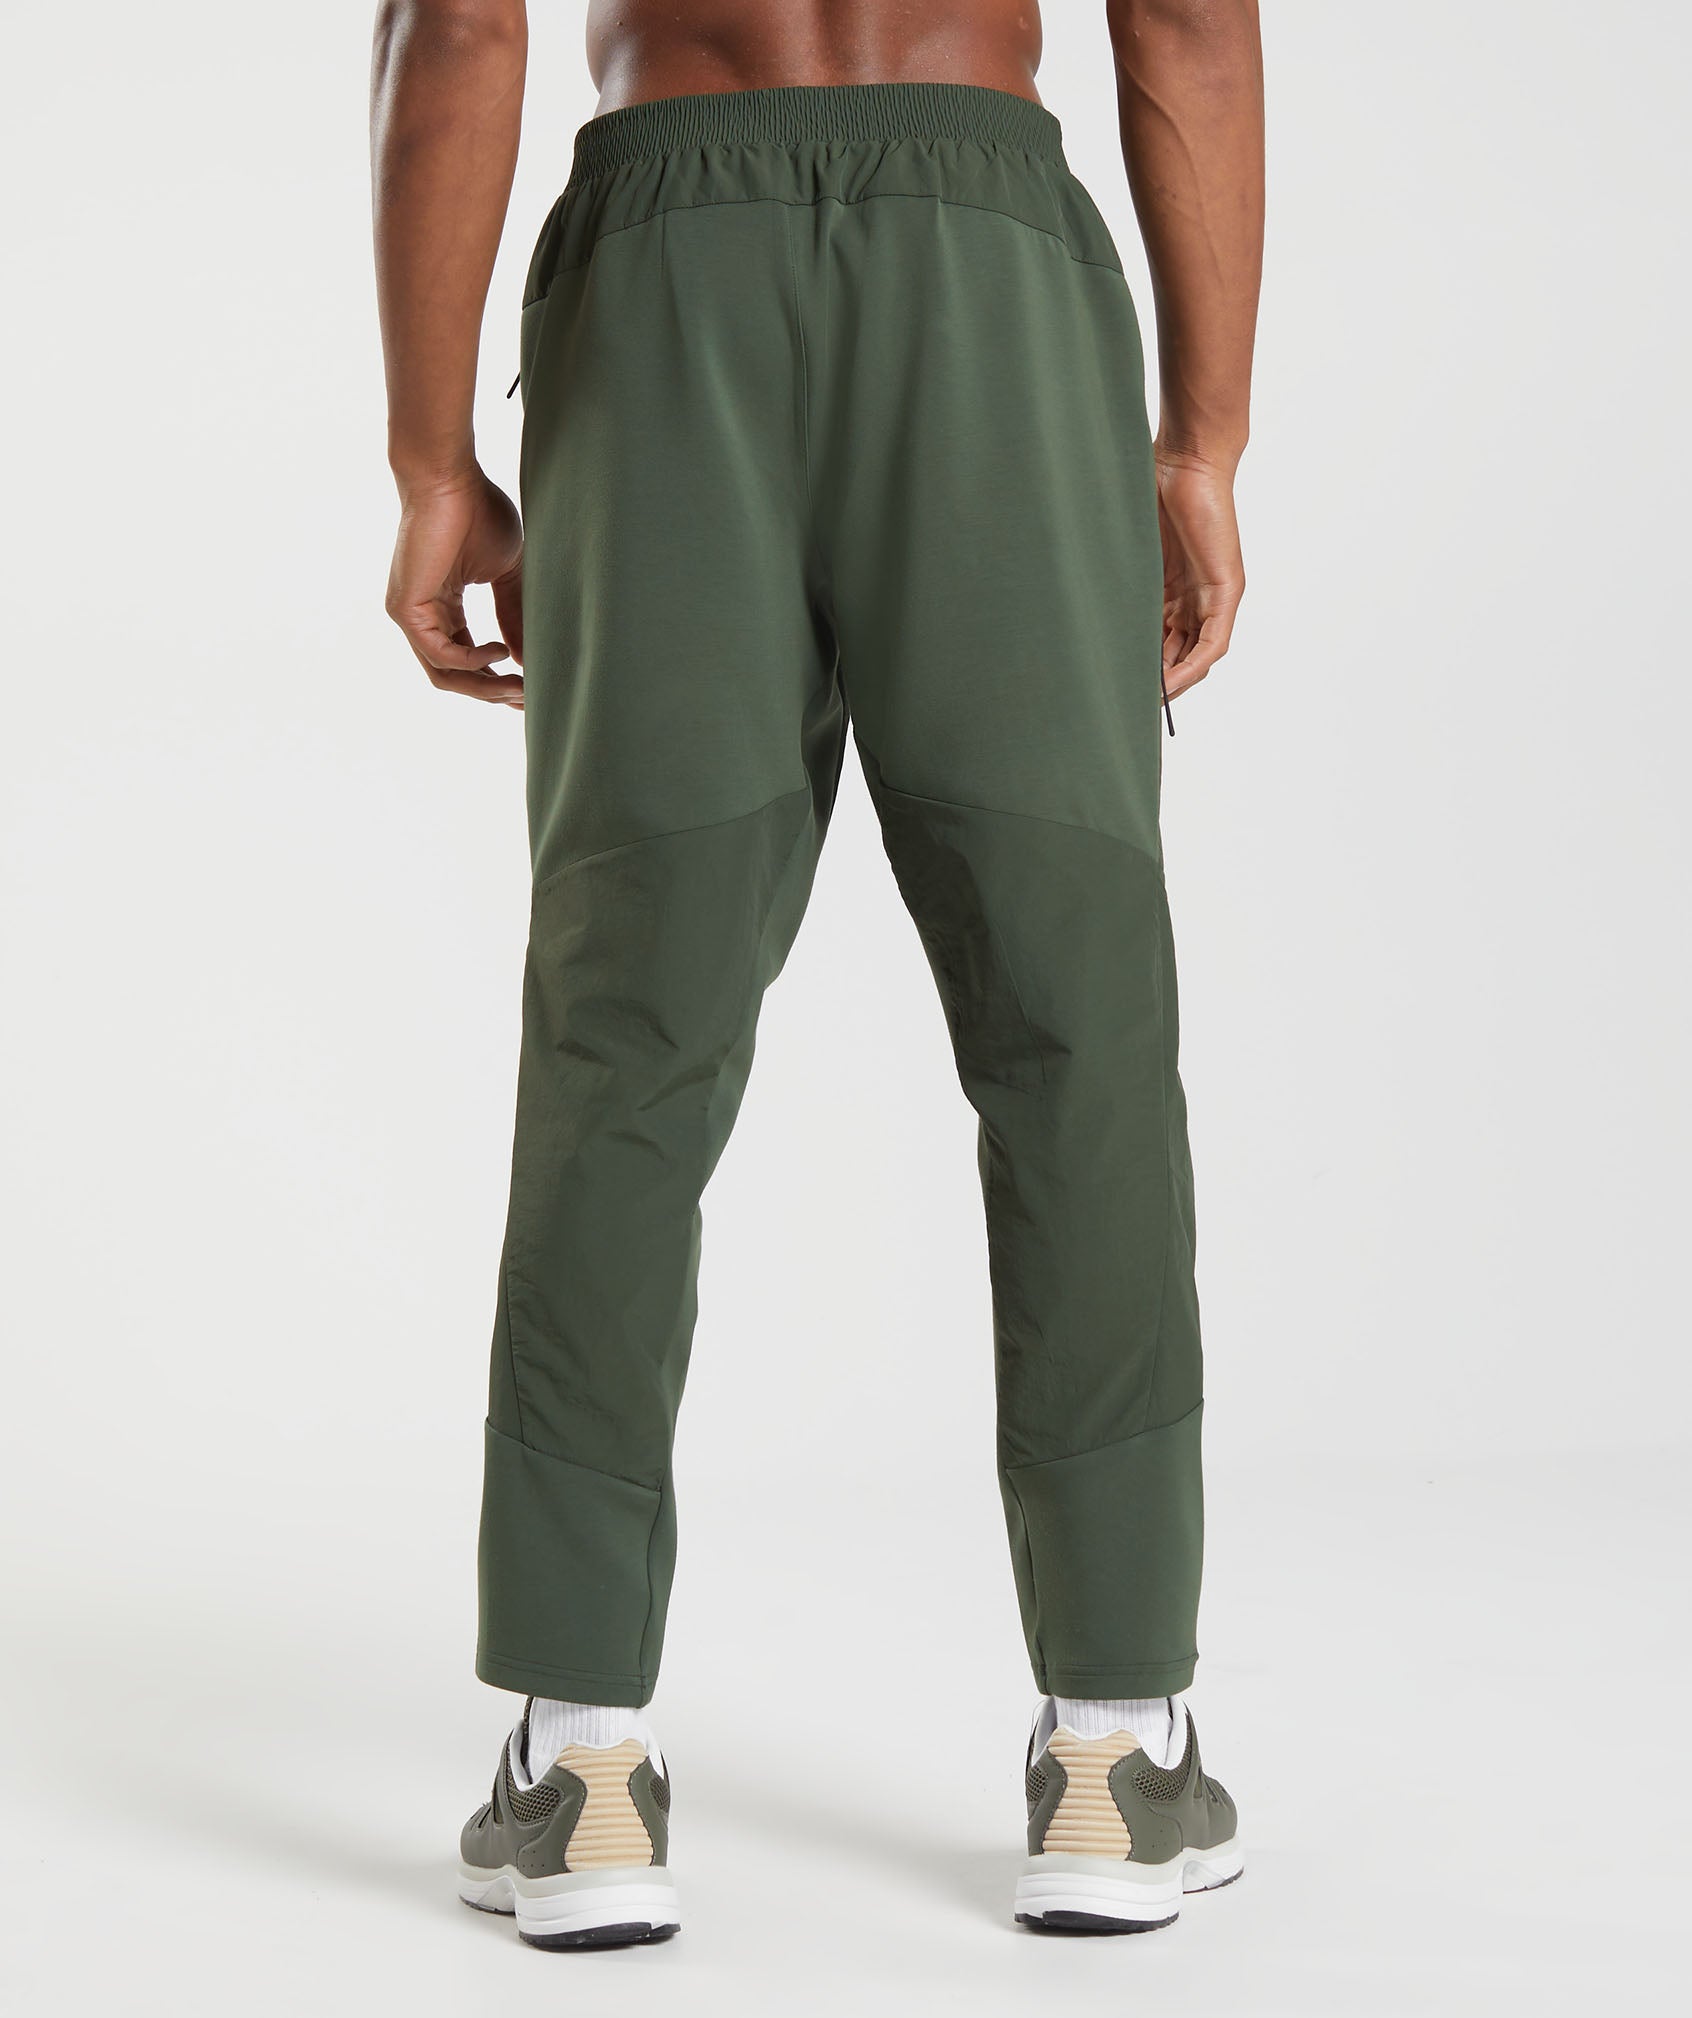 Retake Woven Joggers in Moss Olive - view 2